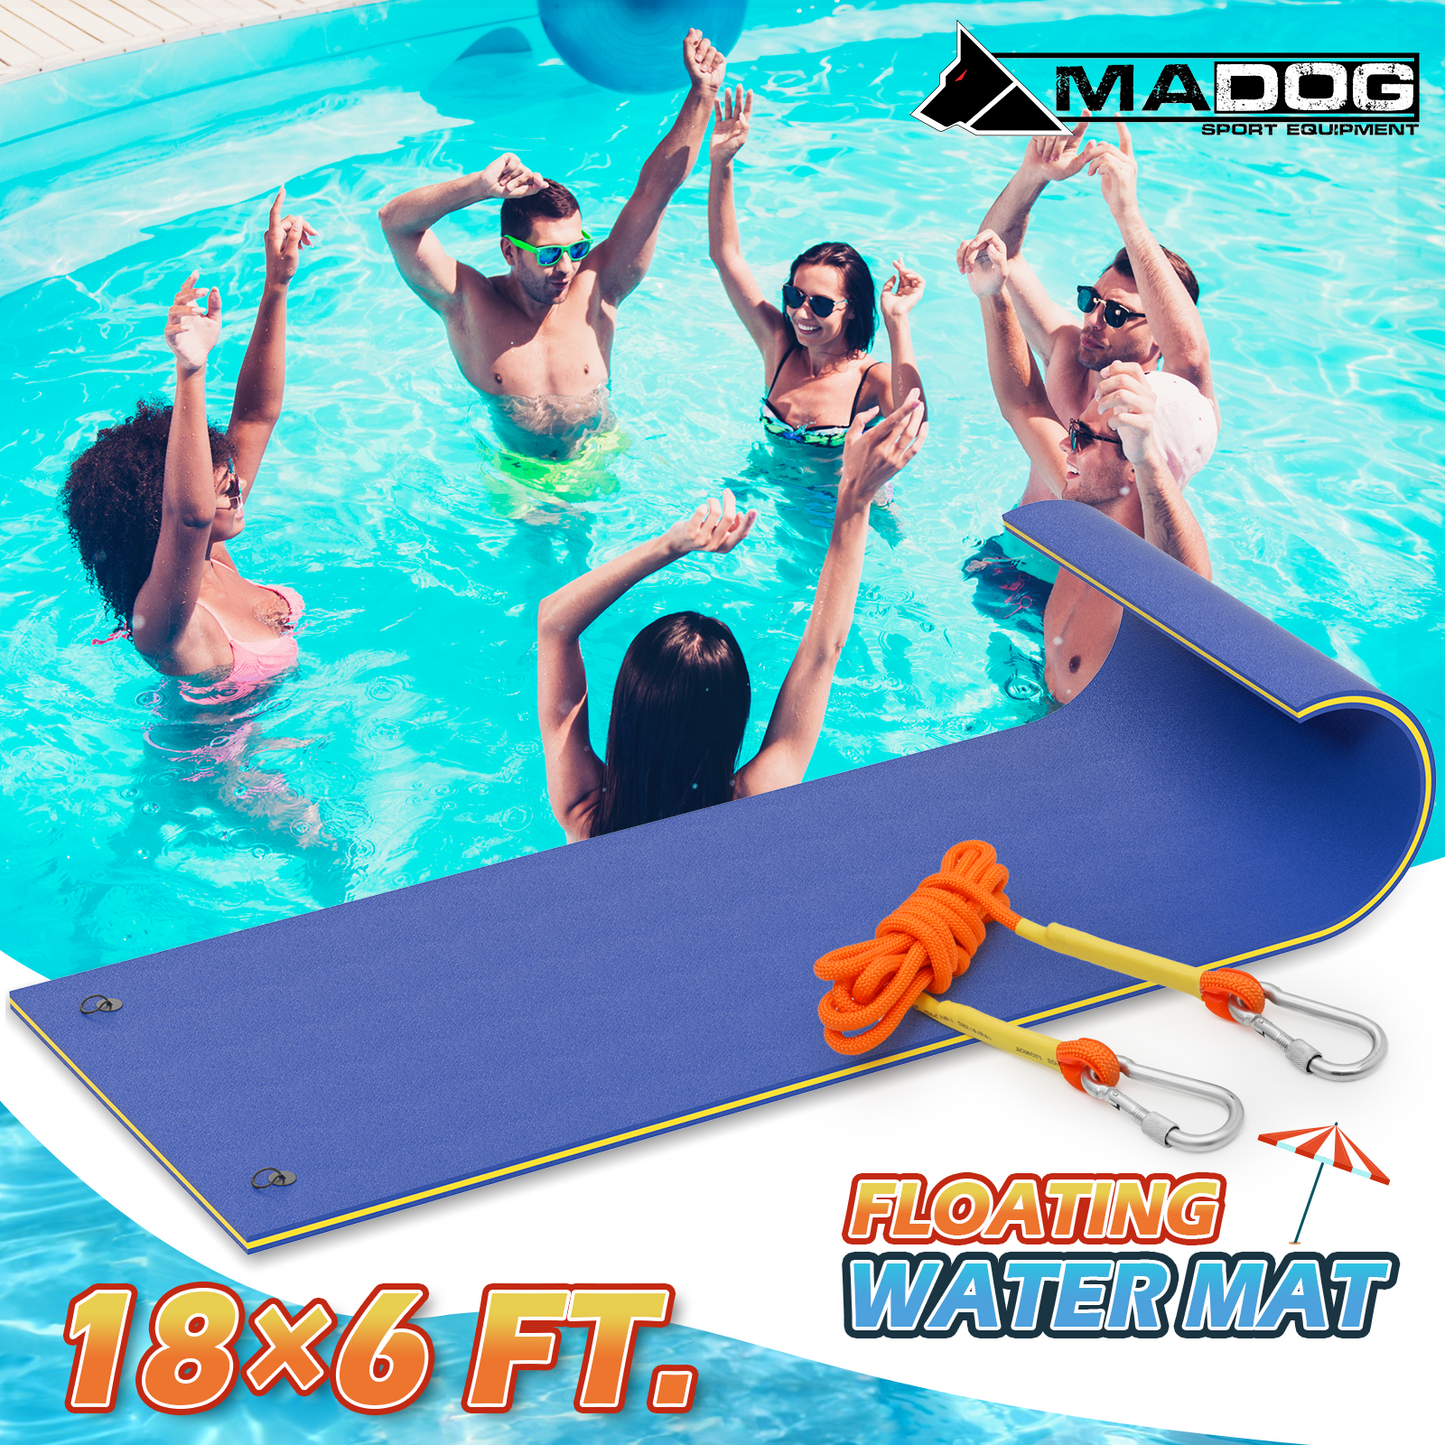 18 * 6 ft Water Floating Mat